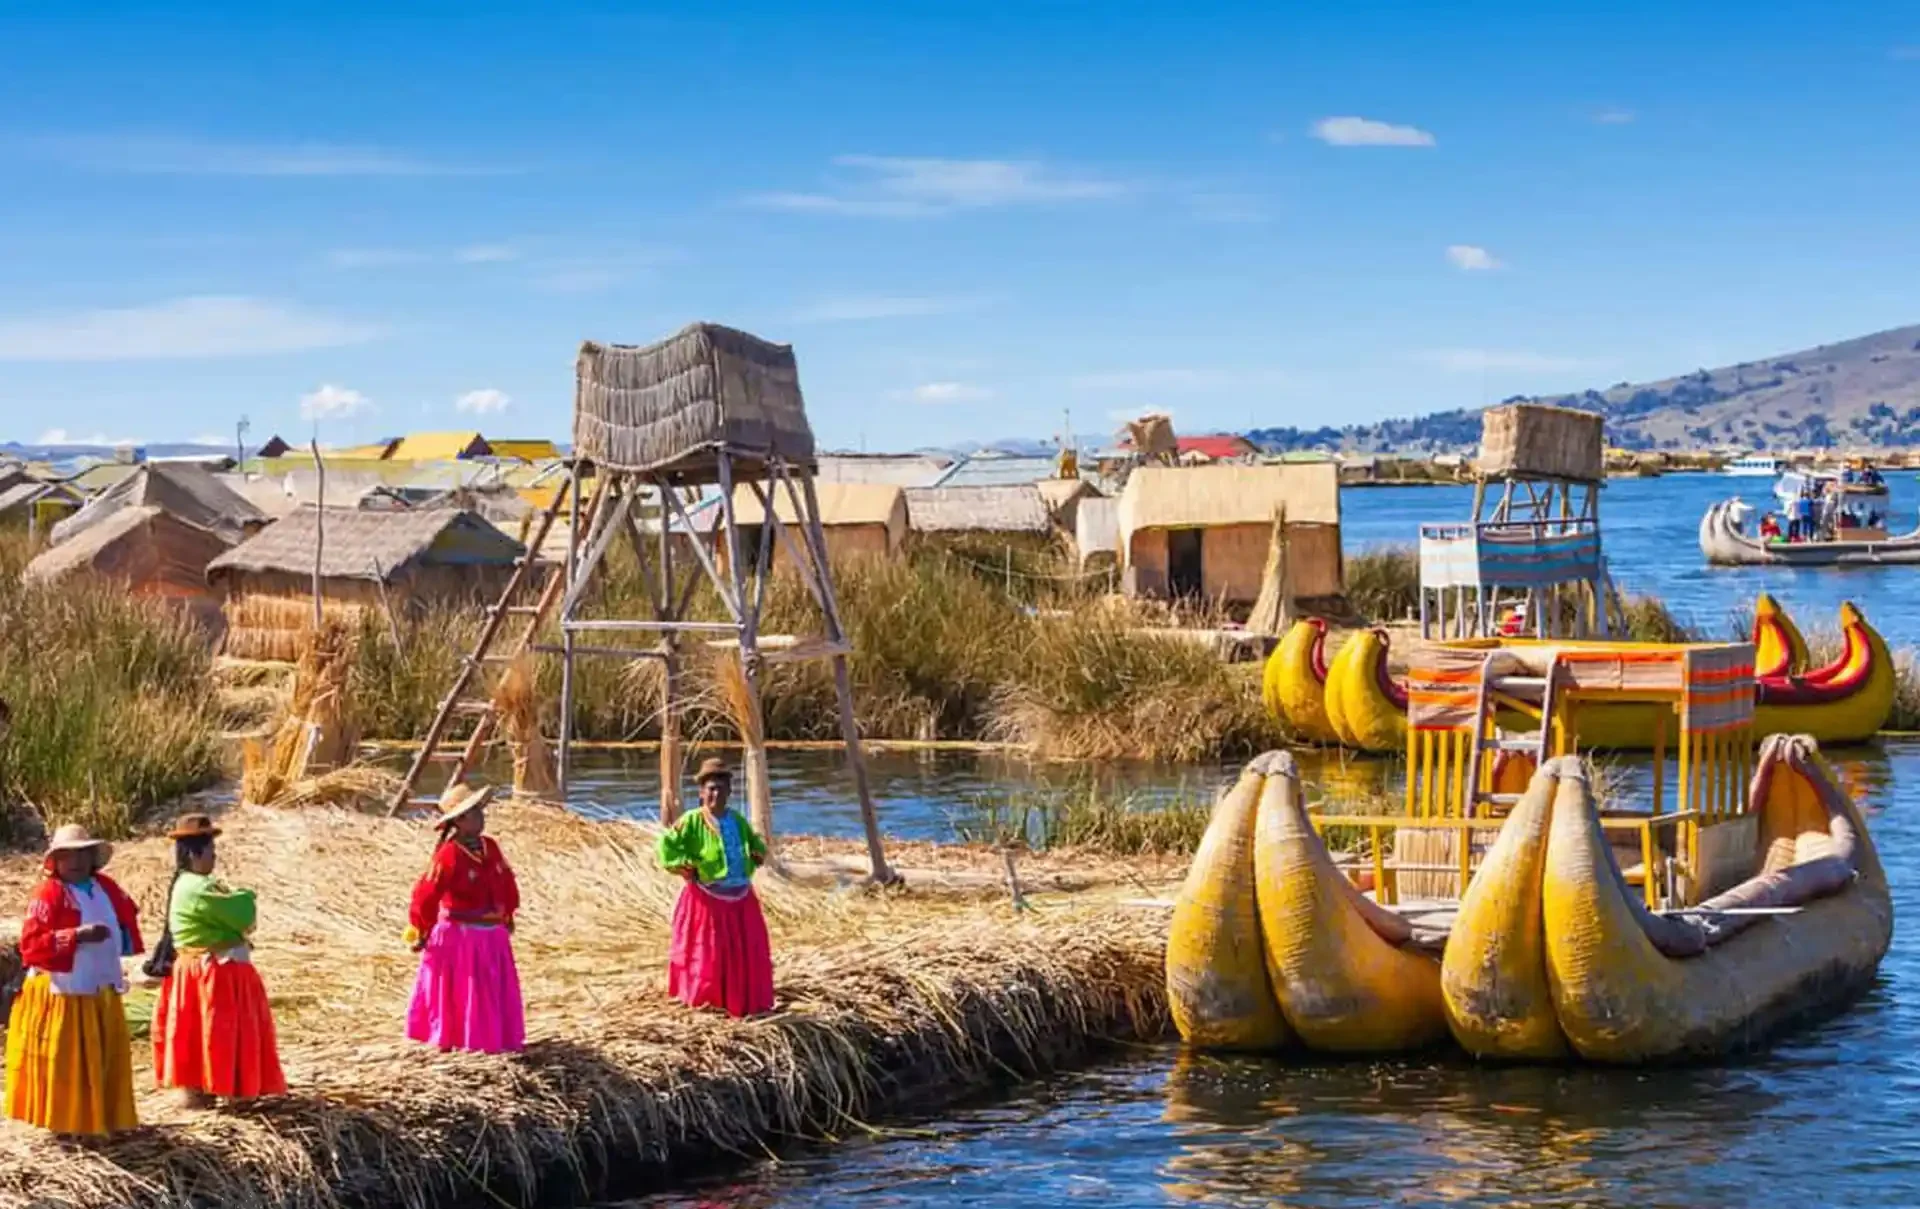 Lake Titicaca - Reflections Of Culture: